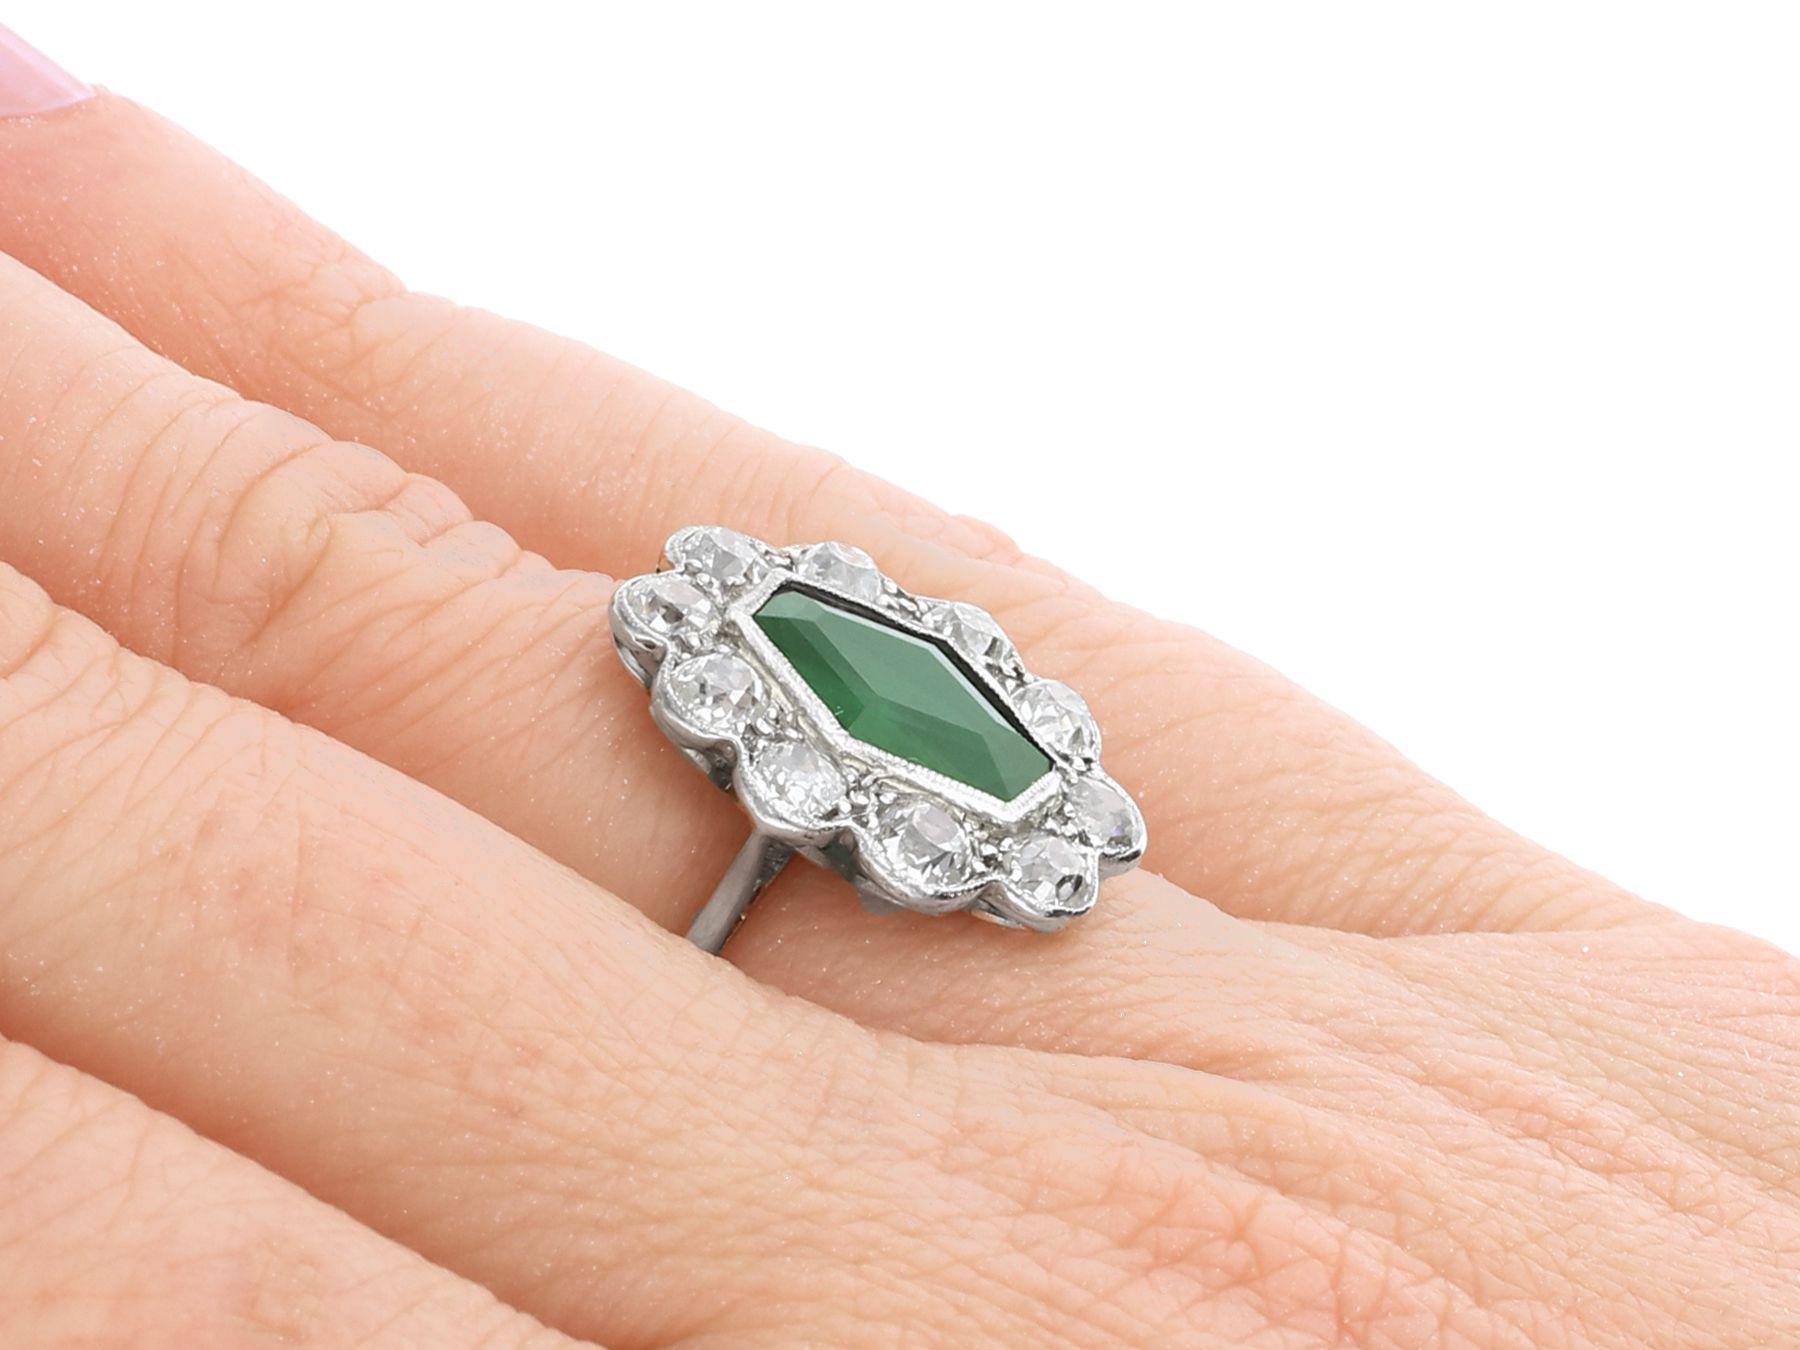 Antique 1.45 Carat Tourmaline and 1.96 Carat Diamond White Gold Cocktail Ring For Sale 2